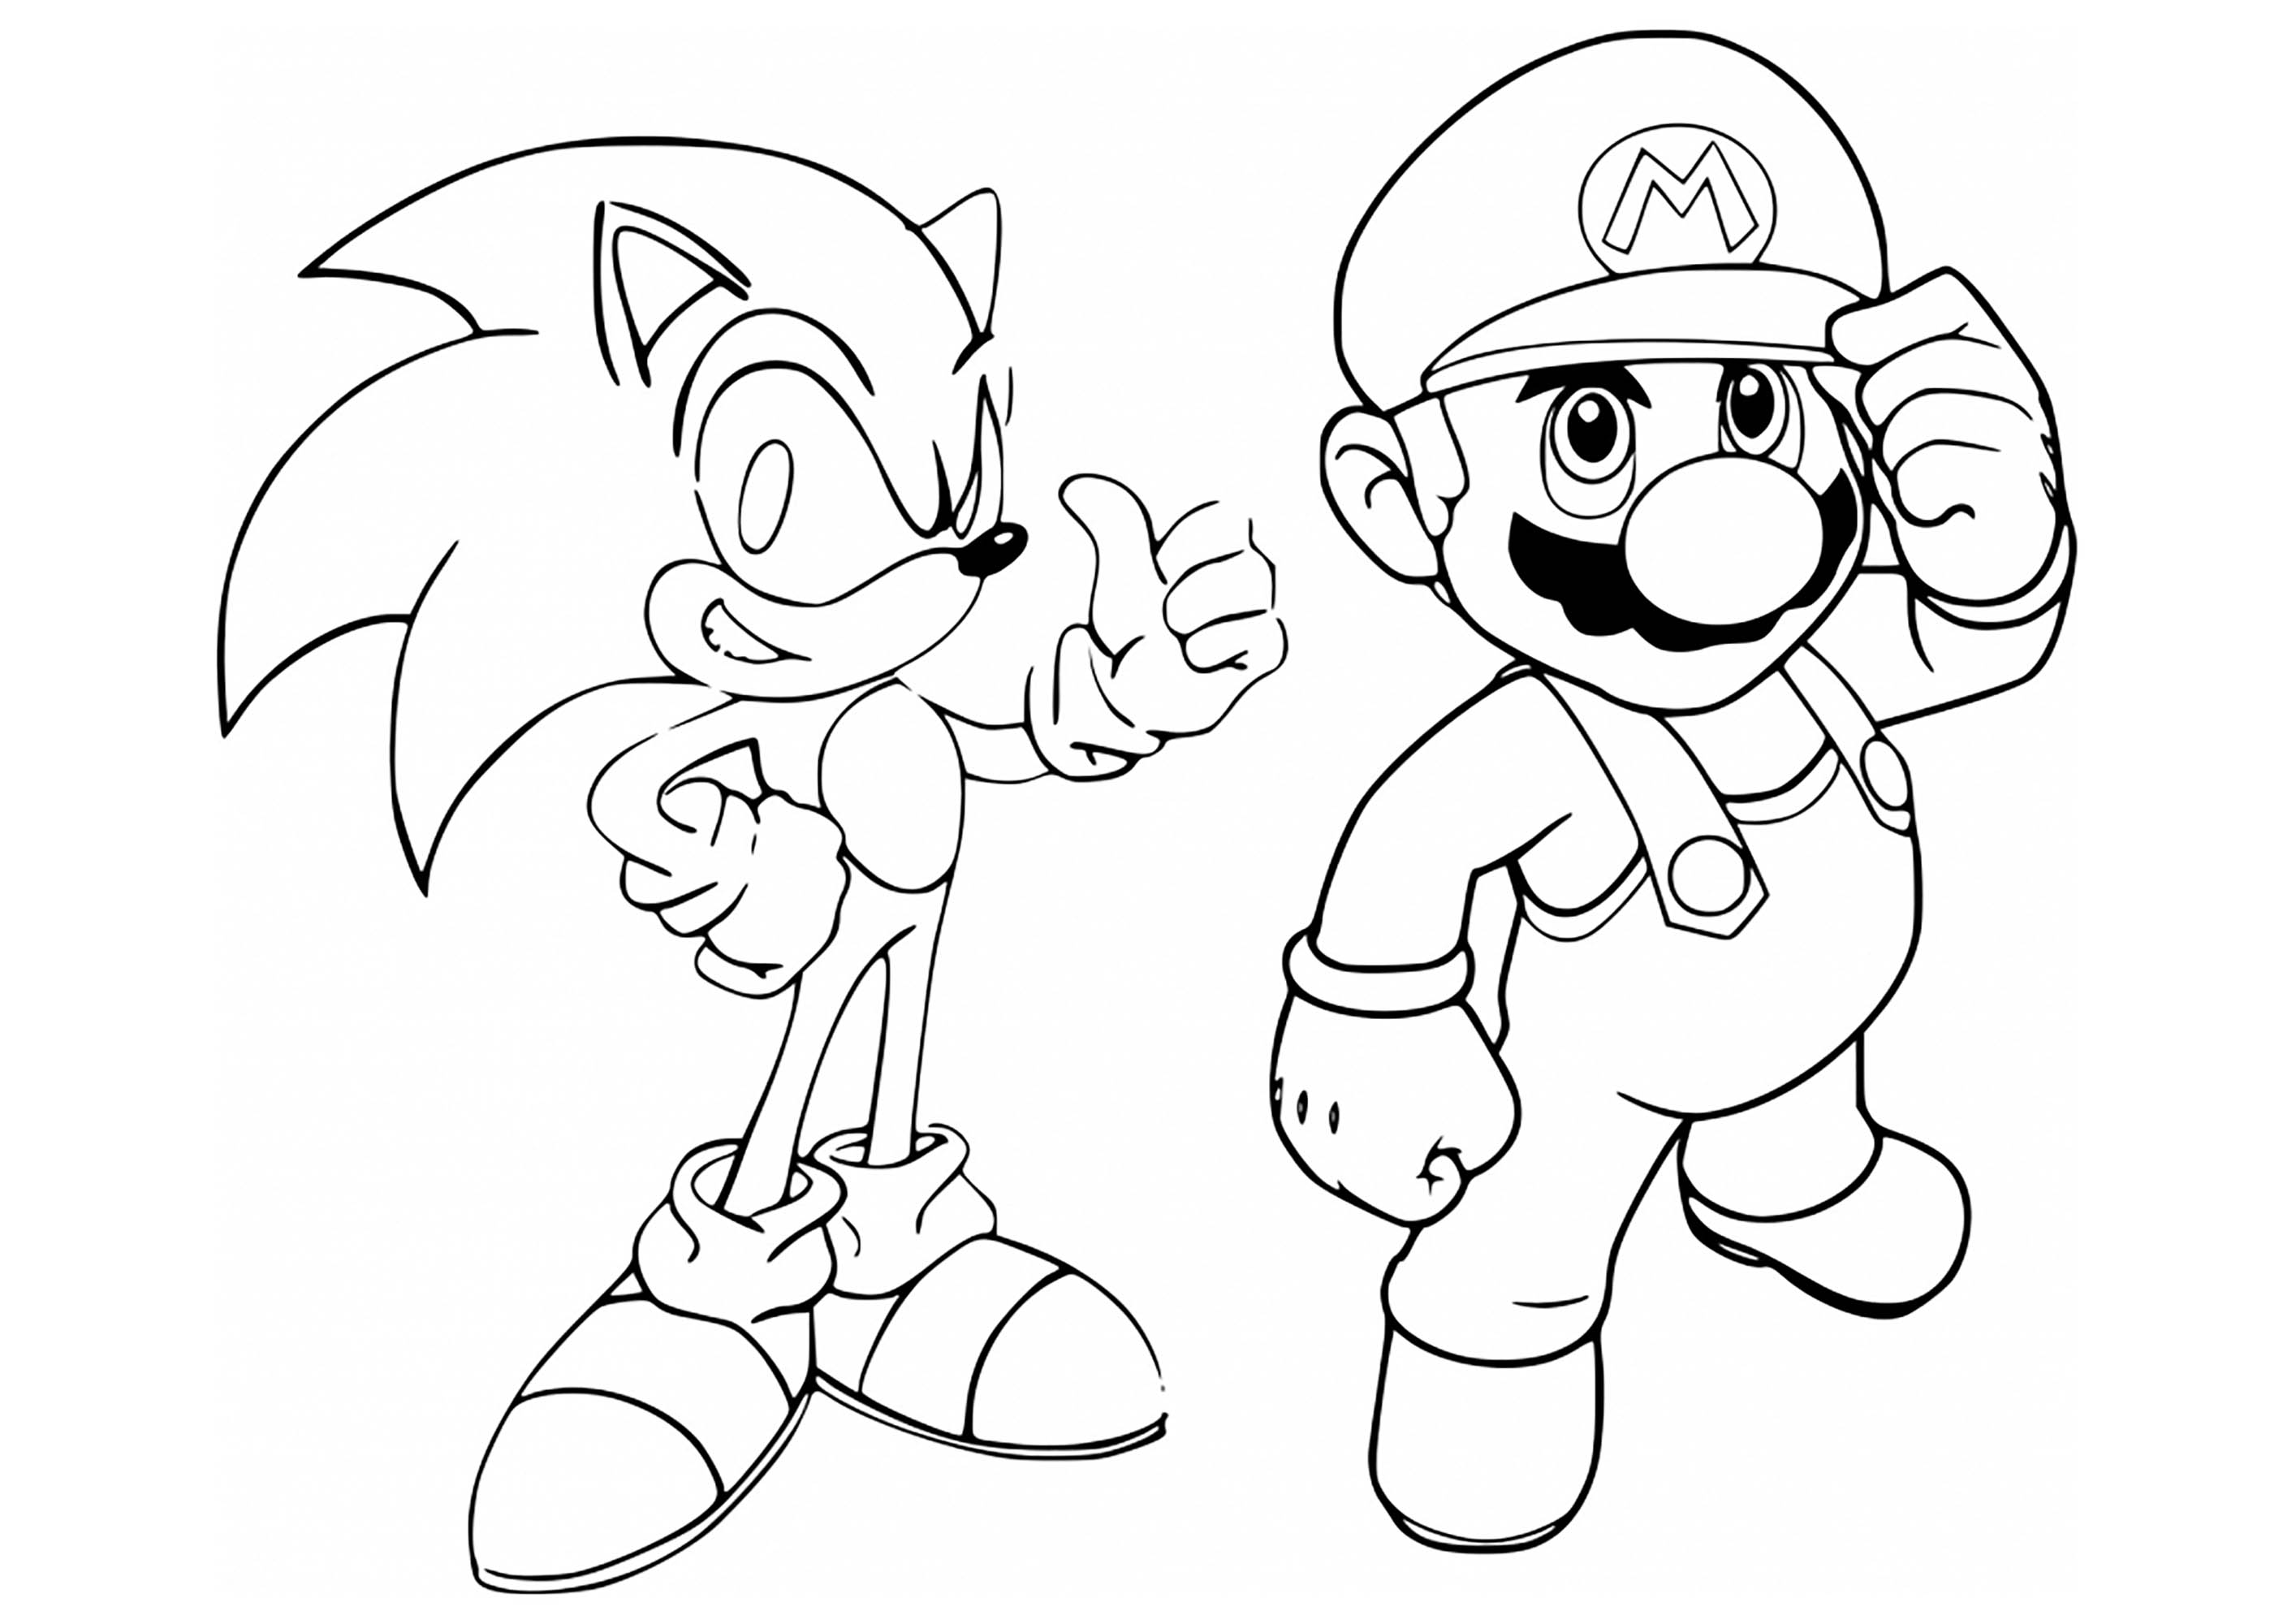 Sonic and Mario at the Olympic Tokyo games console Coloring Page